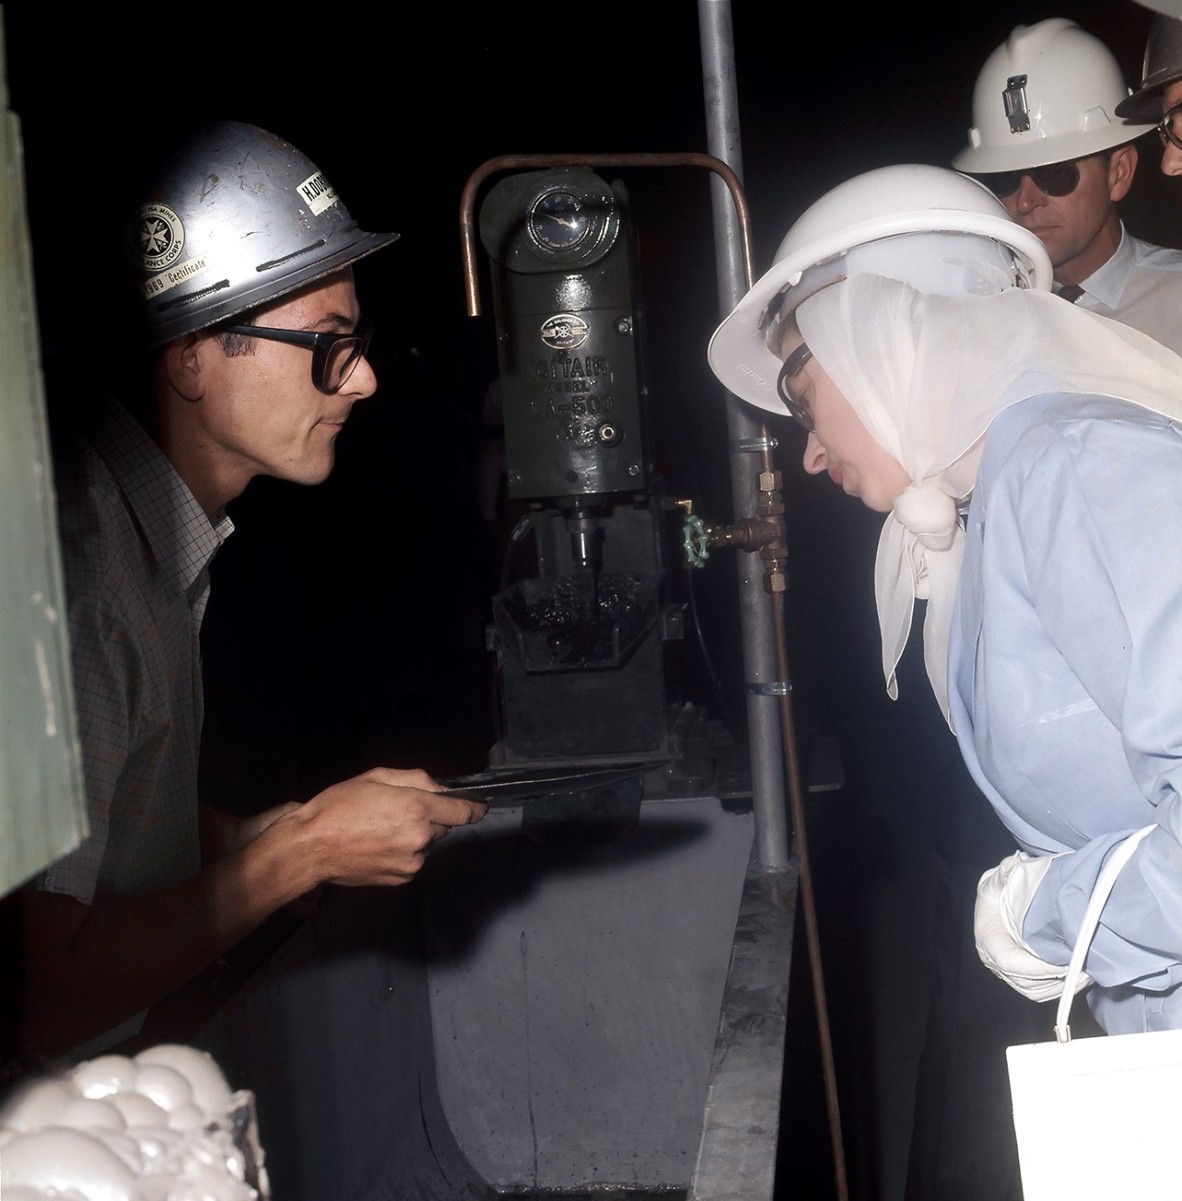 Her Majesty Queen Elizabeth II inspects an assay sample of flotation froth with Control Metallurgist Herman Dobrowolska explaining its characteristics.